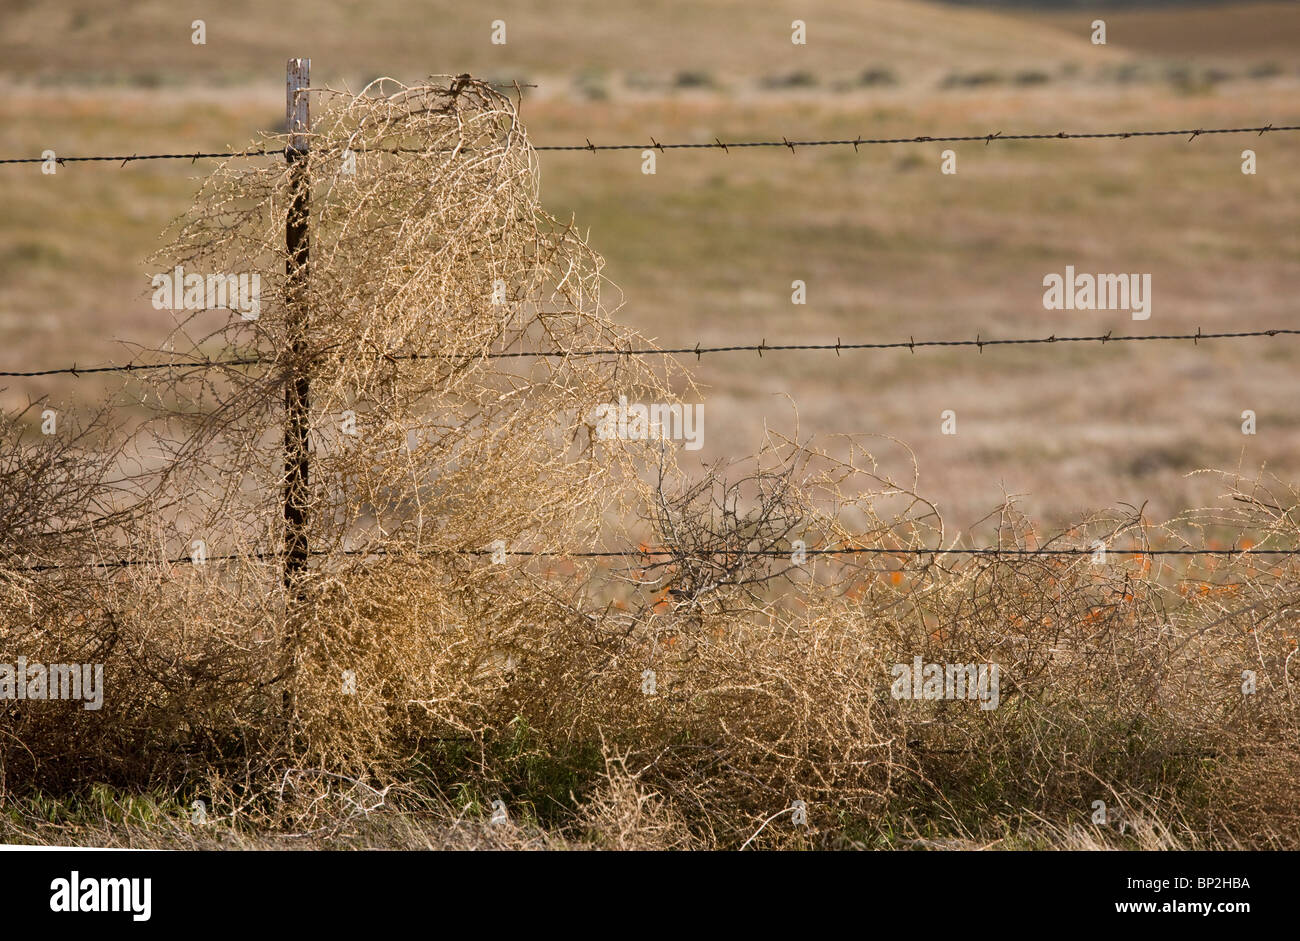 Tumbleweed Salsola tragus caught on fence, southern California. Stock Photo